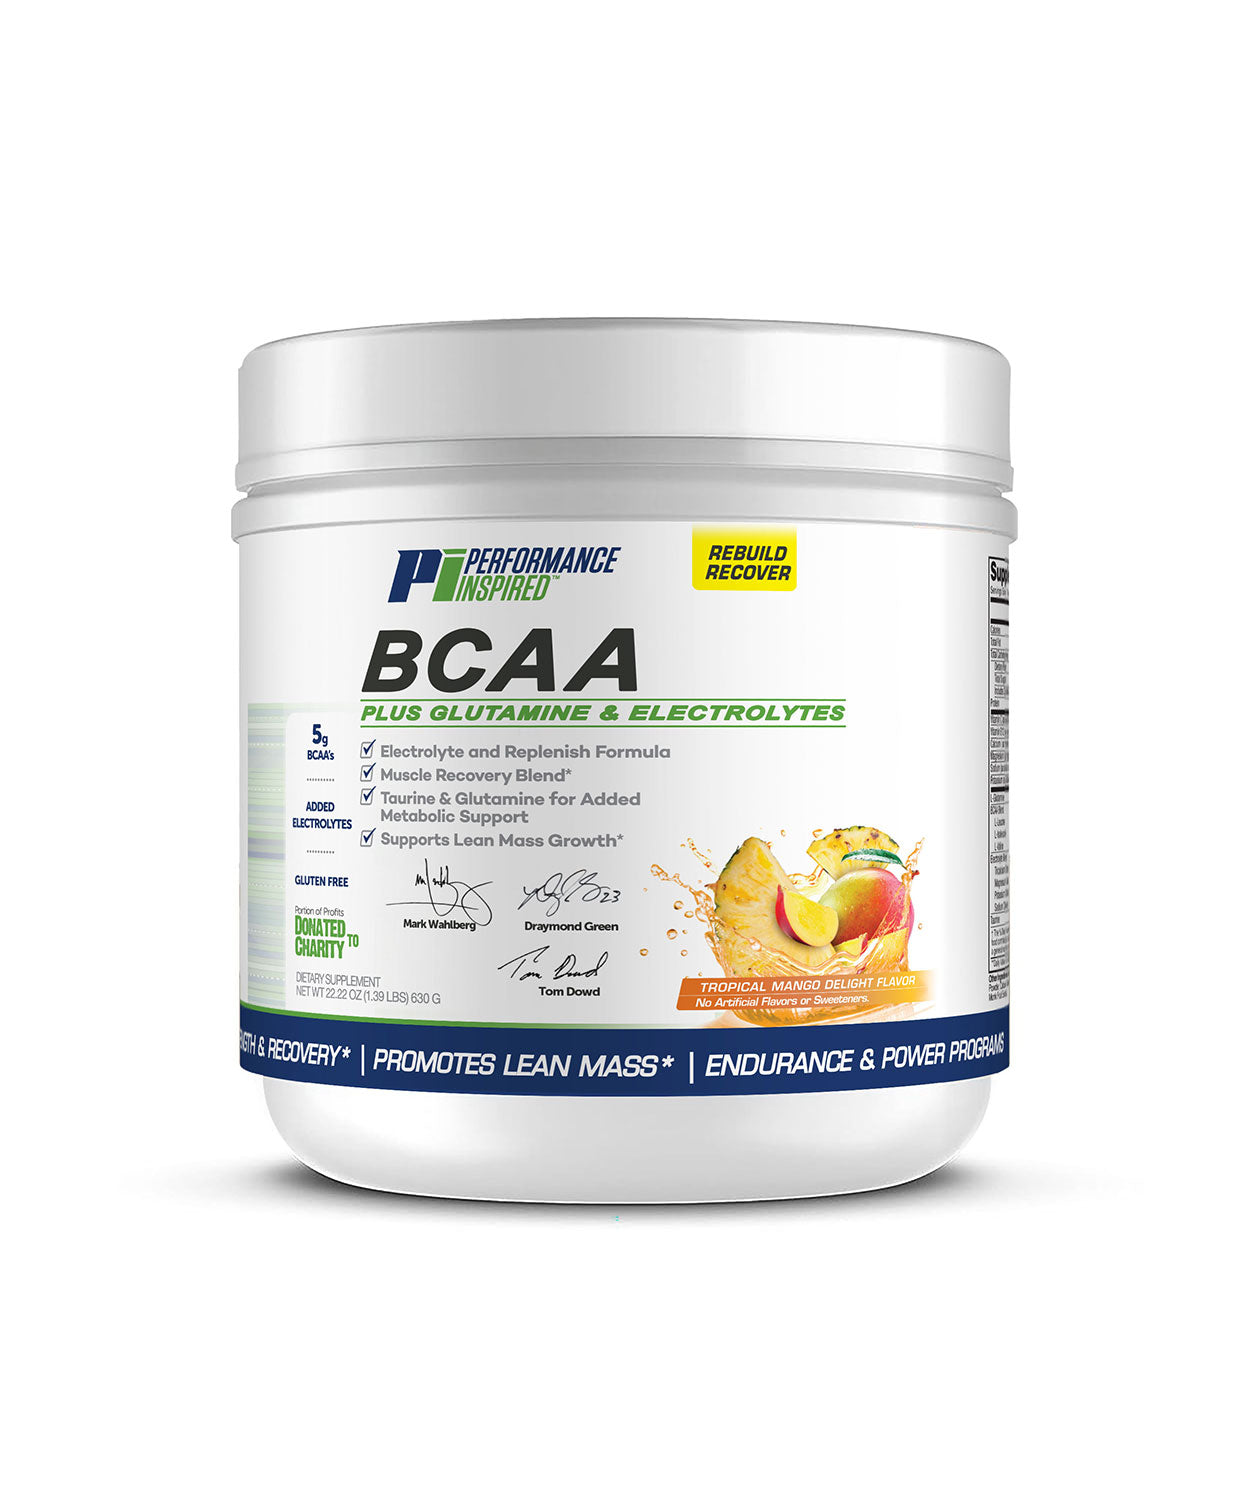 best workout supplements, best whey isolate in india, india's best whey protein, performance whey protein, whey protein shake, plant based protein powder, best mass gainer in india, pre workout energy drink, best bcaa supplements, best creatine monohydrate